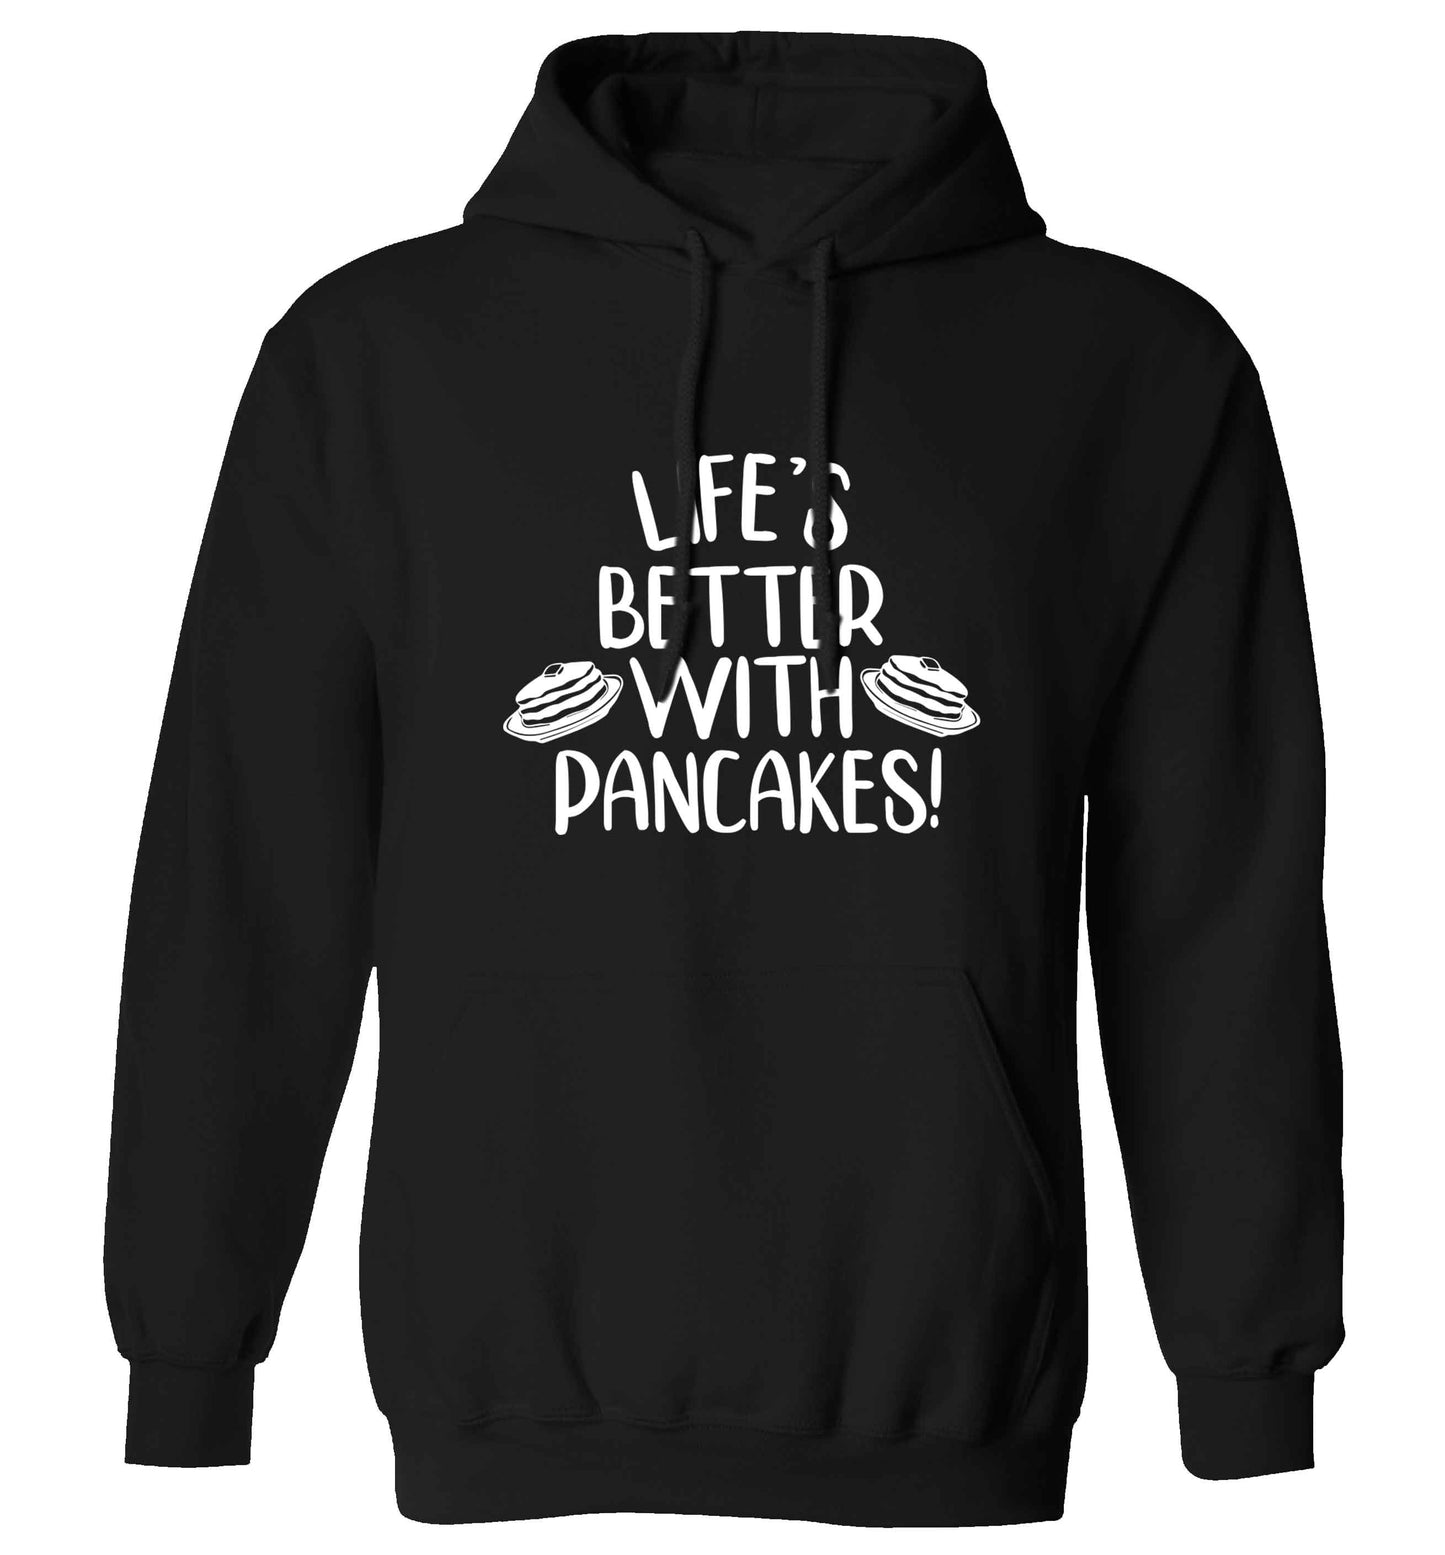 Life's better with pancakes adults unisex black hoodie 2XL